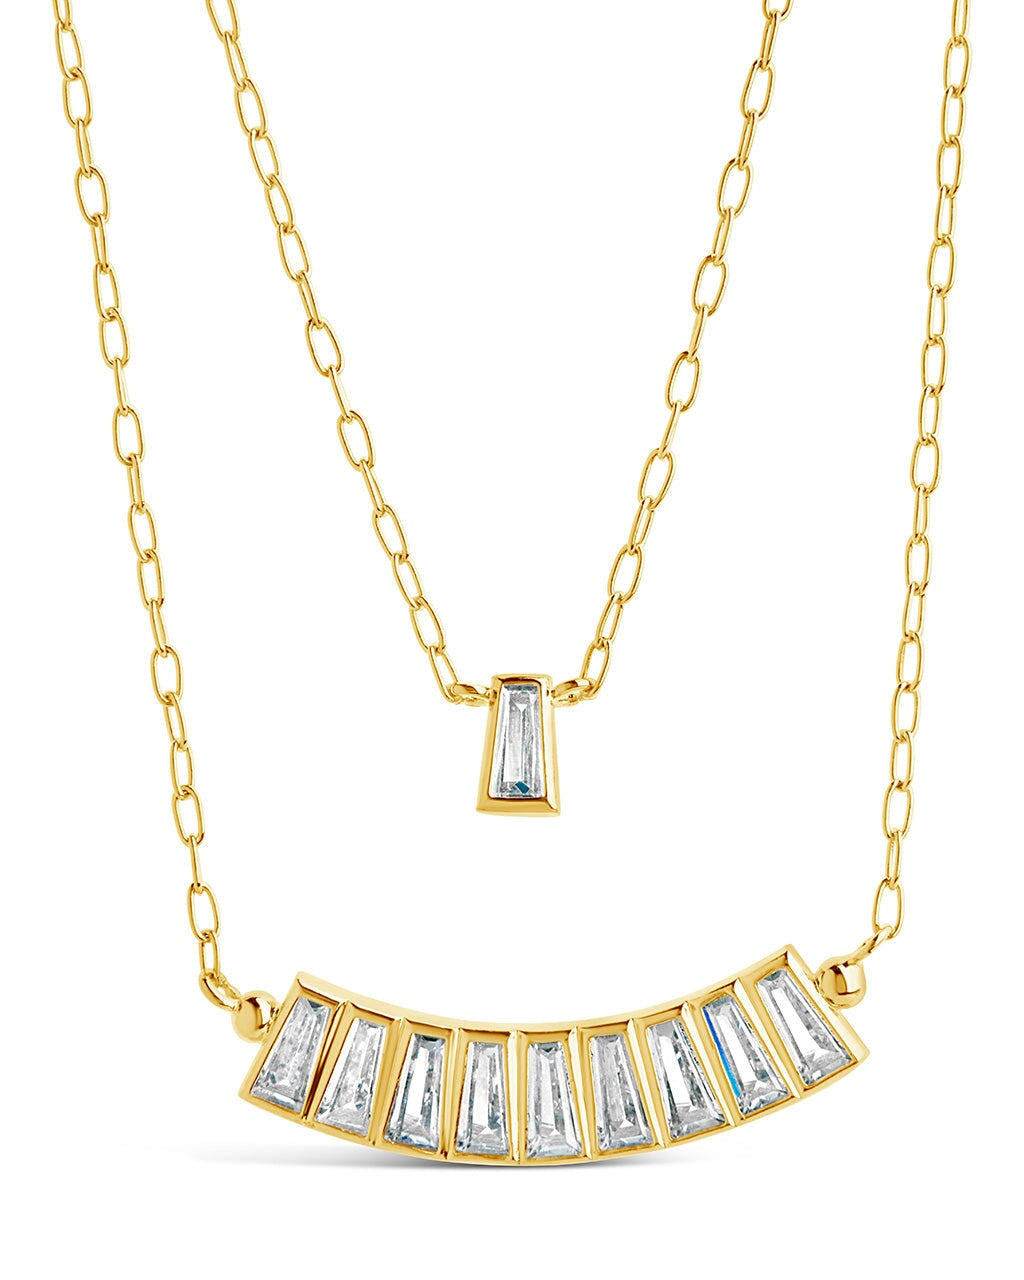 Lillian Layered Necklace Necklace Sterling Forever Gold 